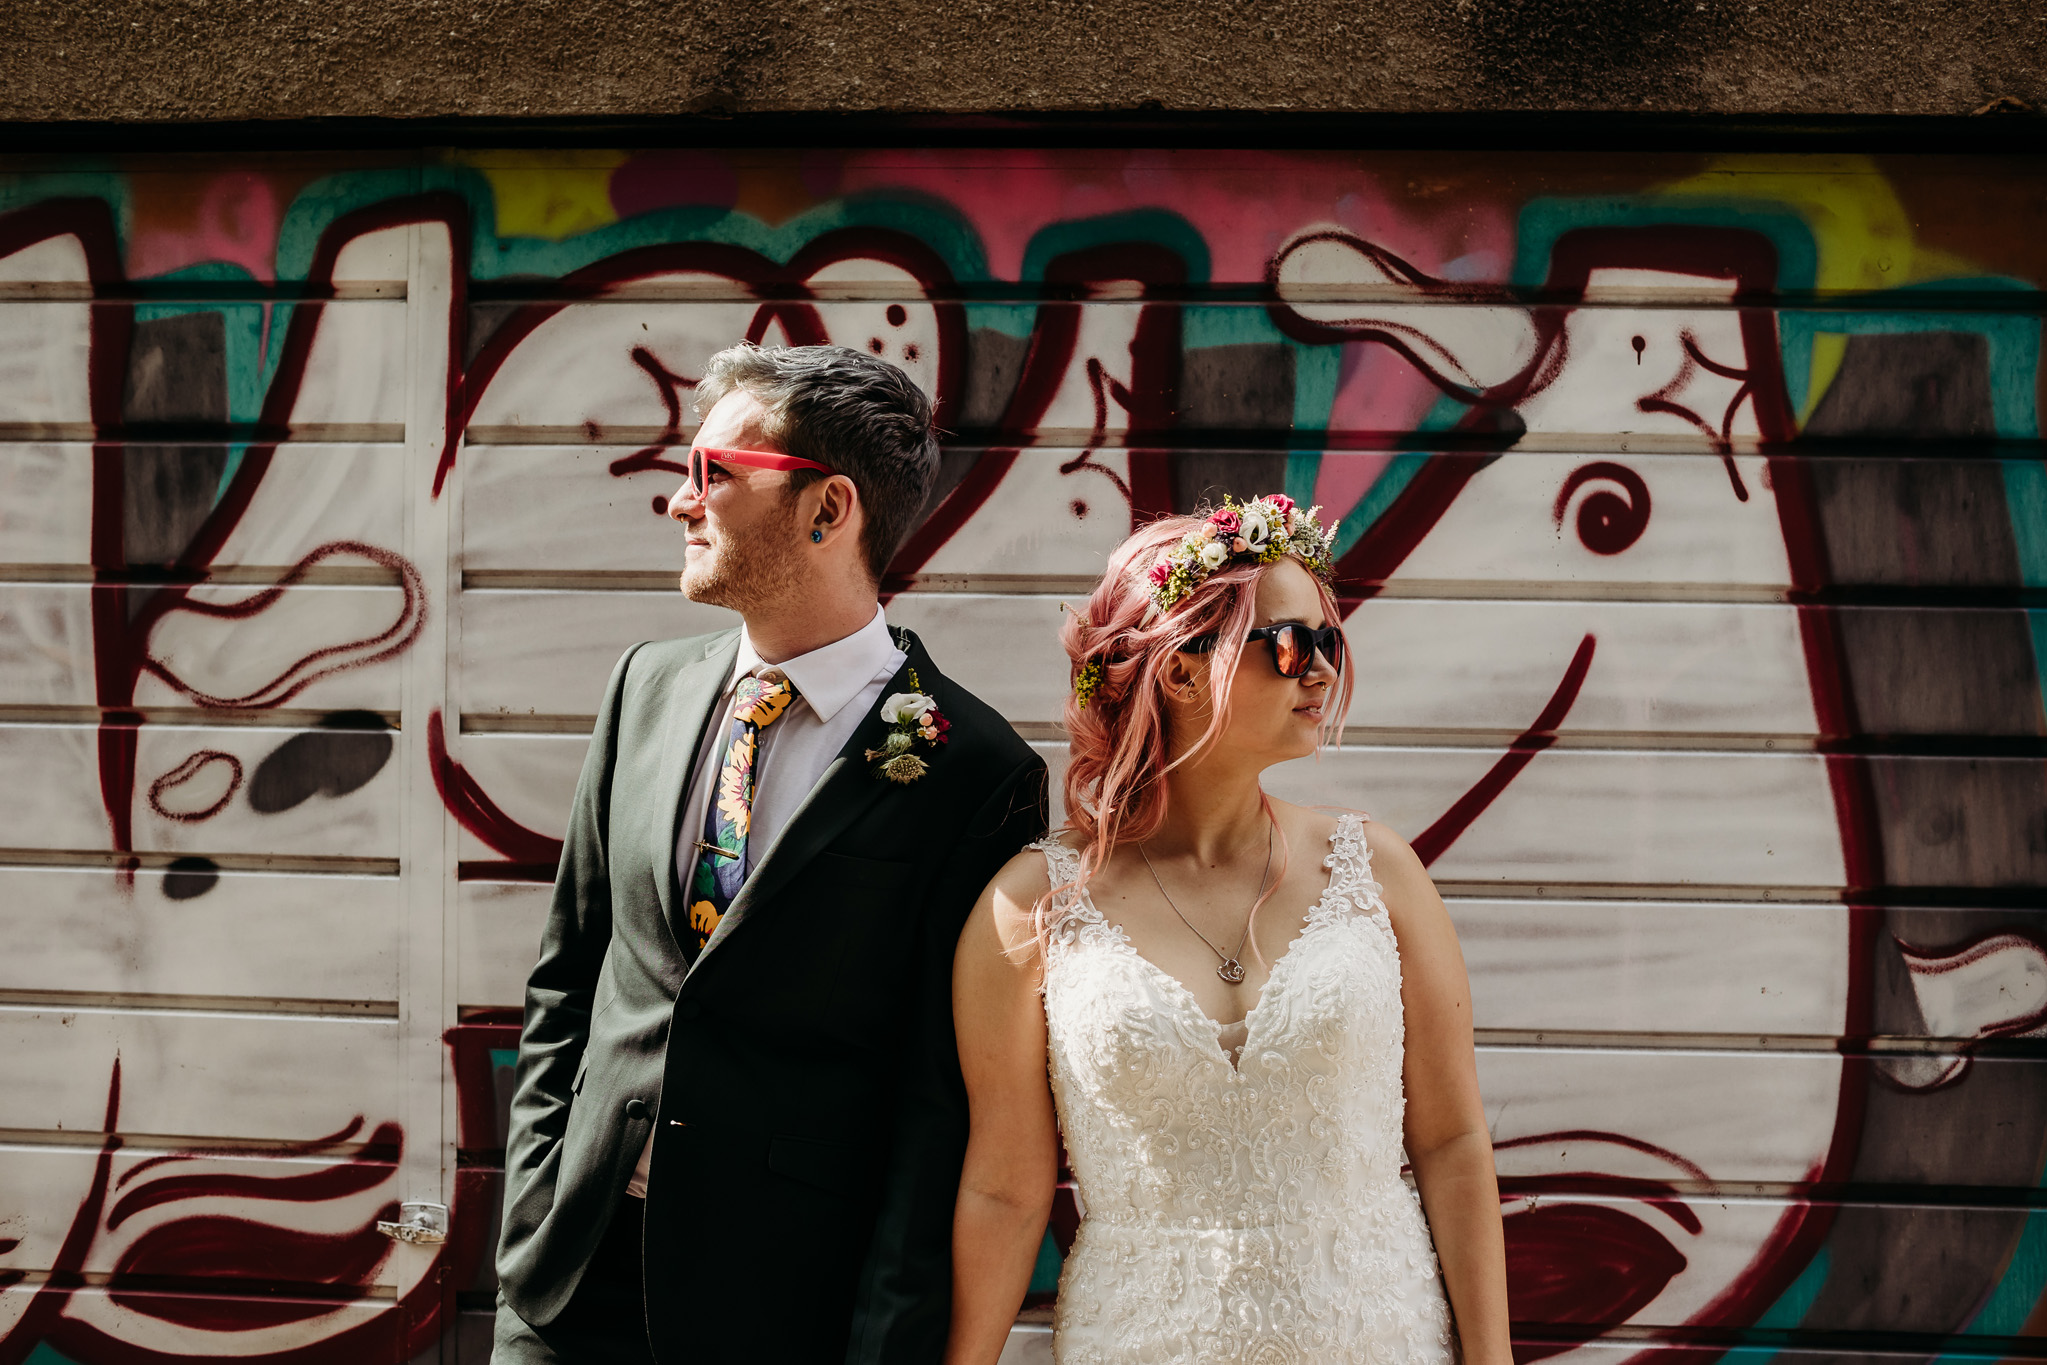 Colourful Bristol Wedding - Bride and Groom in front of graffiti